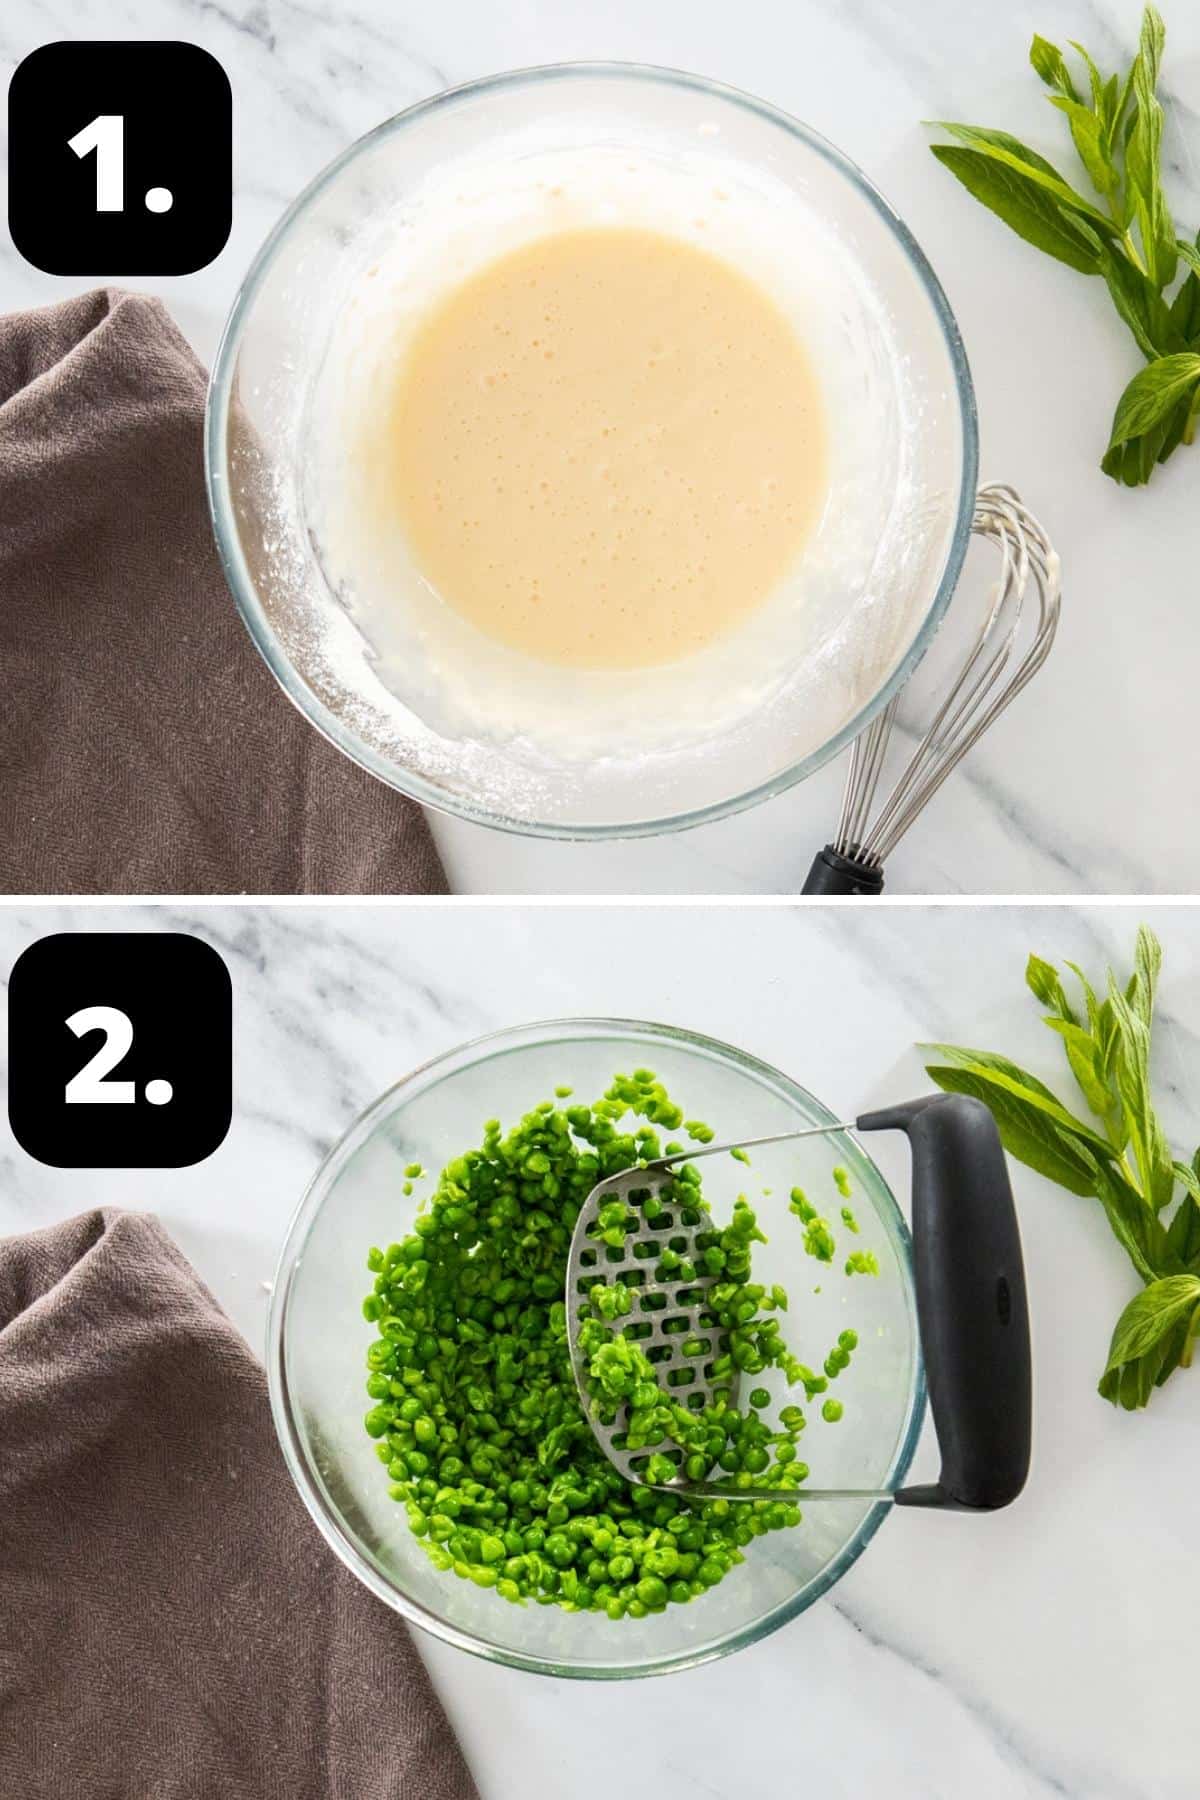 Steps 1-2 of preparing this recipe - preparing the batter in a bowl and mashing the peas slightly in another bowl.